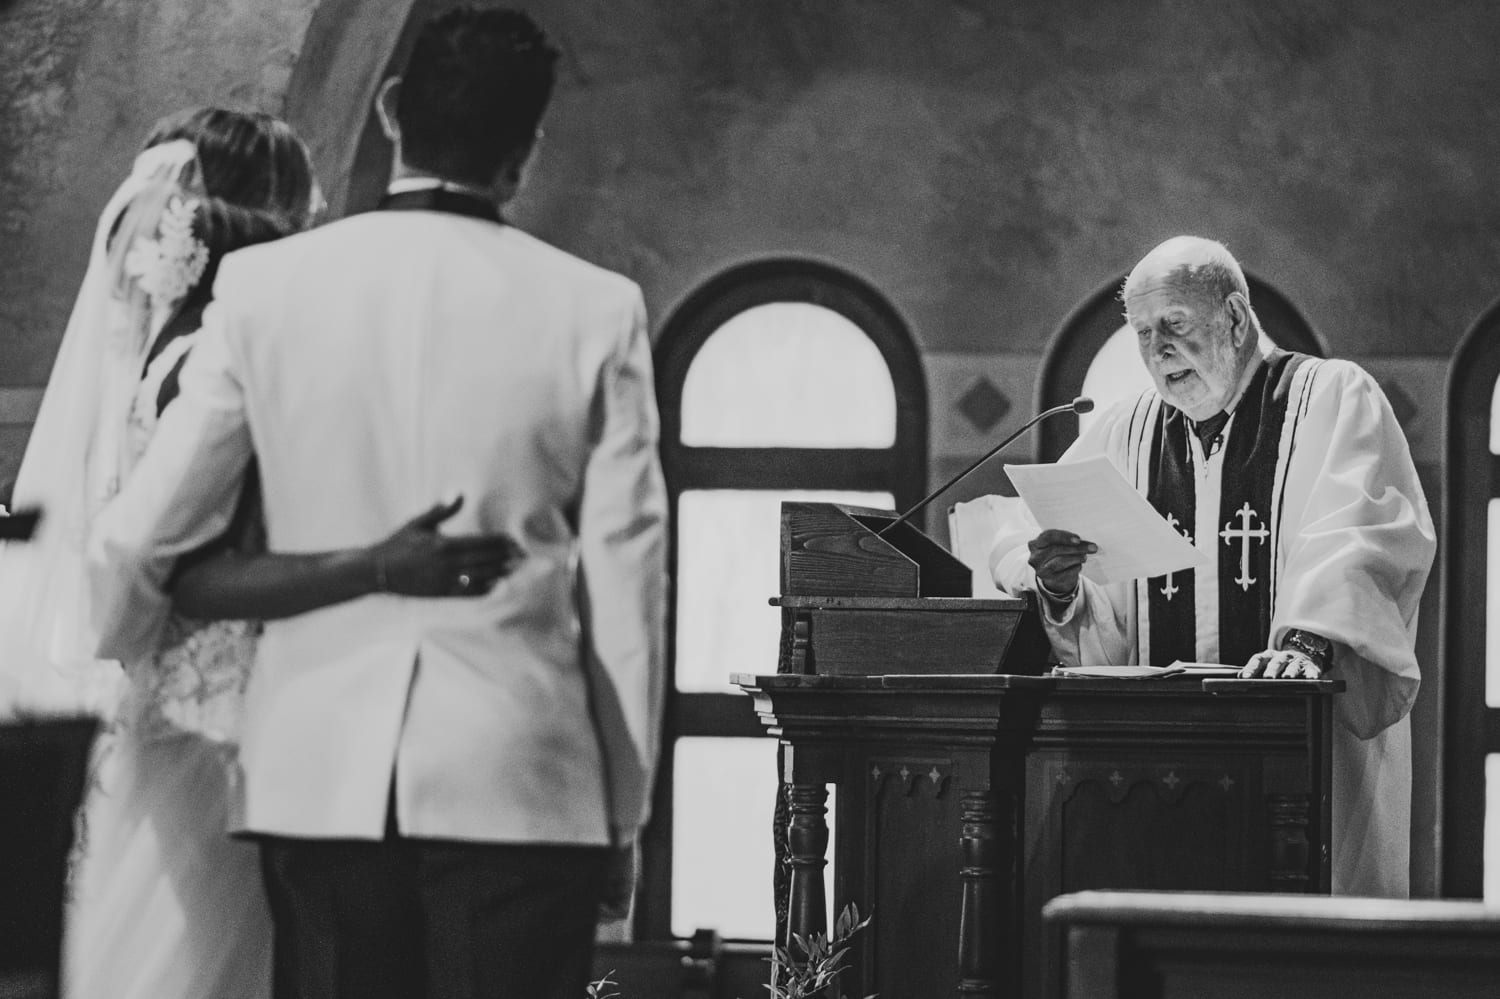 A priest officiates a coral gables wedding ceremony.